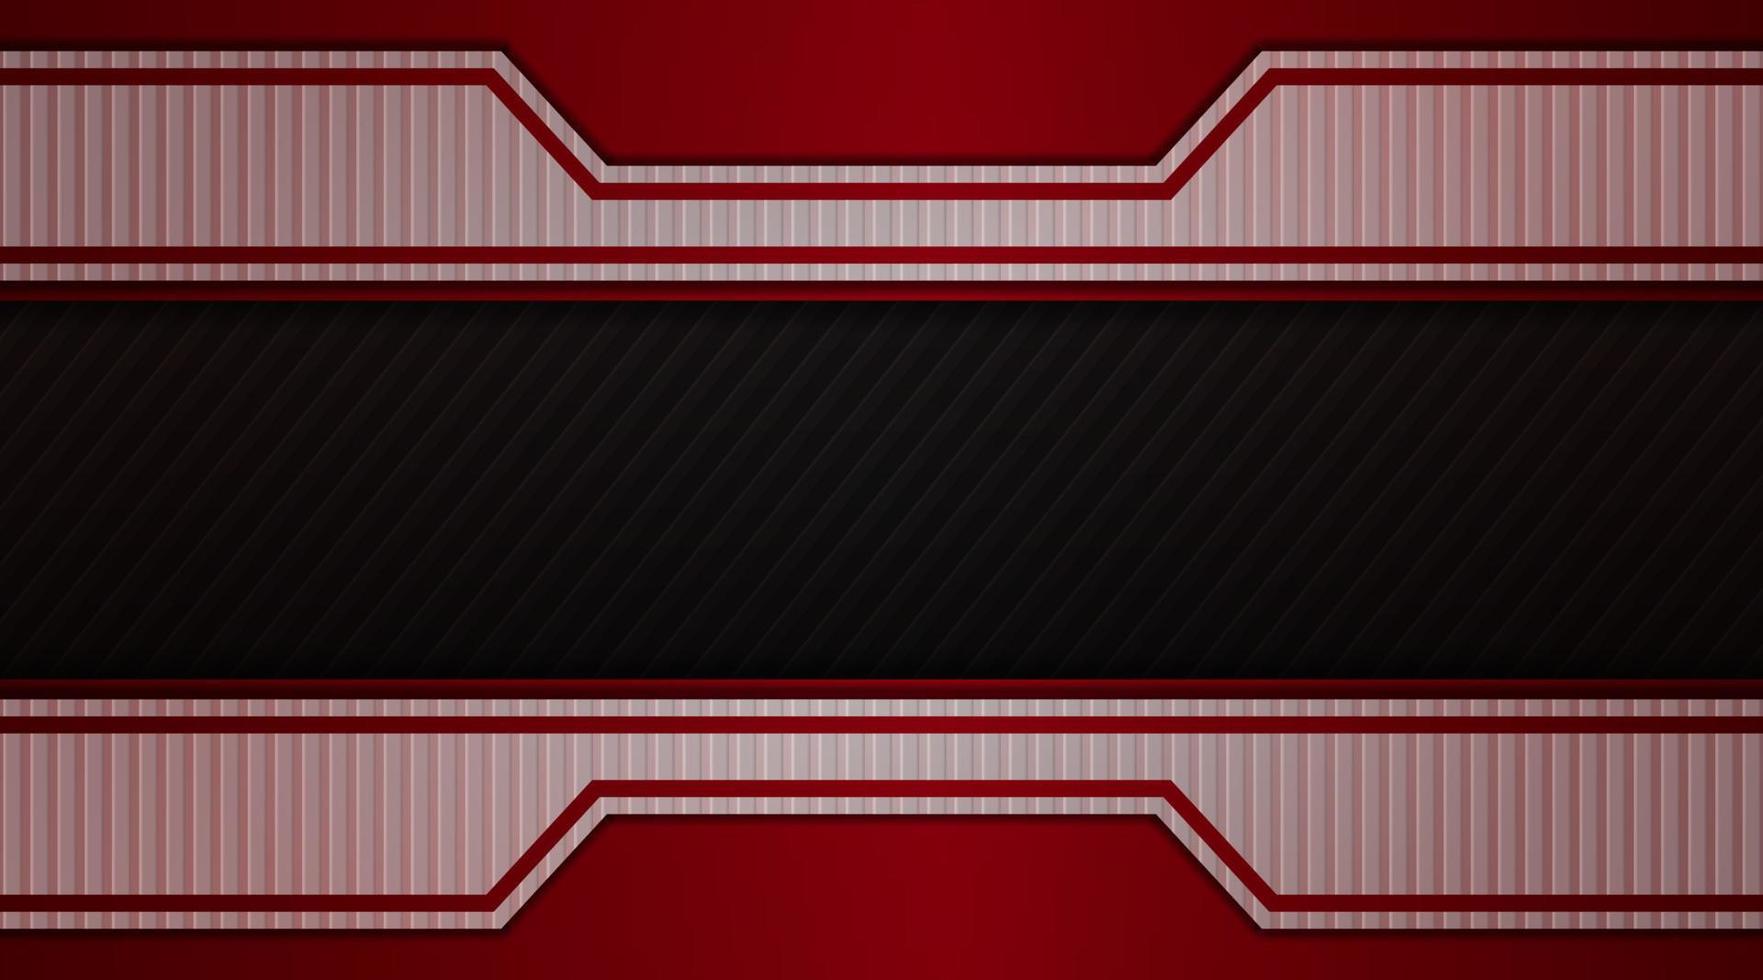 abstract background, red white and black, with stripe pattern vector